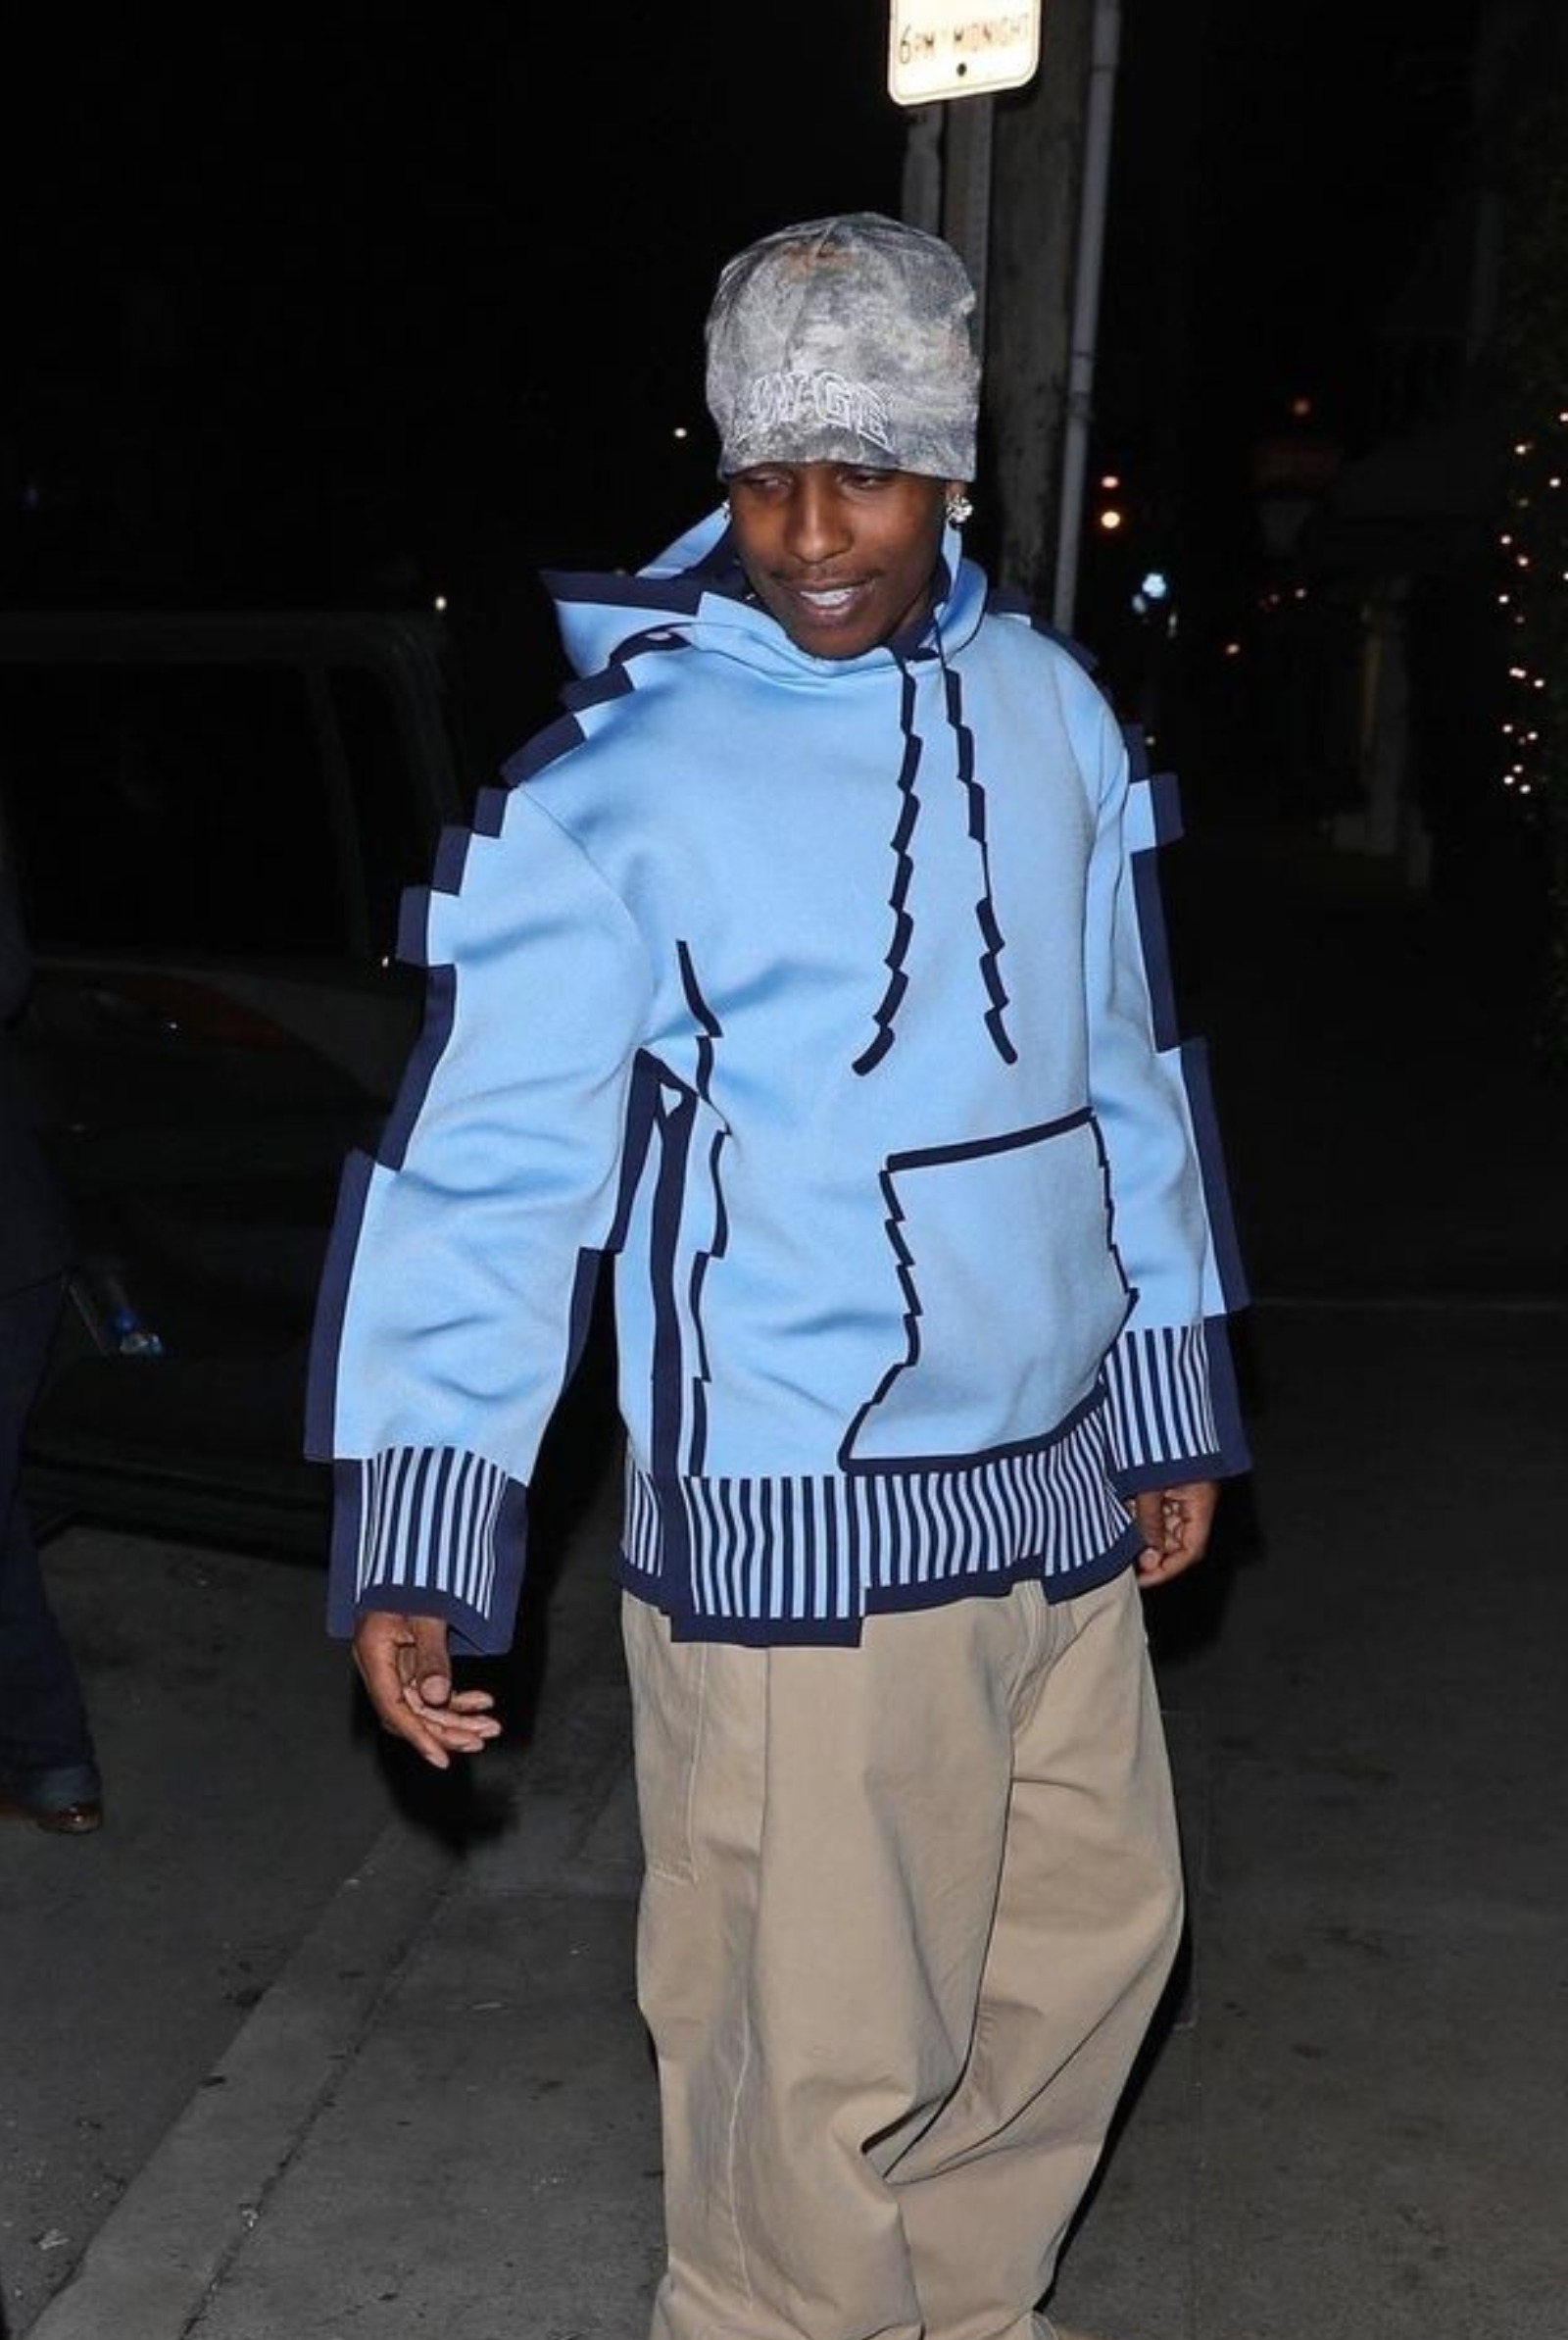 Fashion Cartoonification of Jacket worn by ASAP Rocky